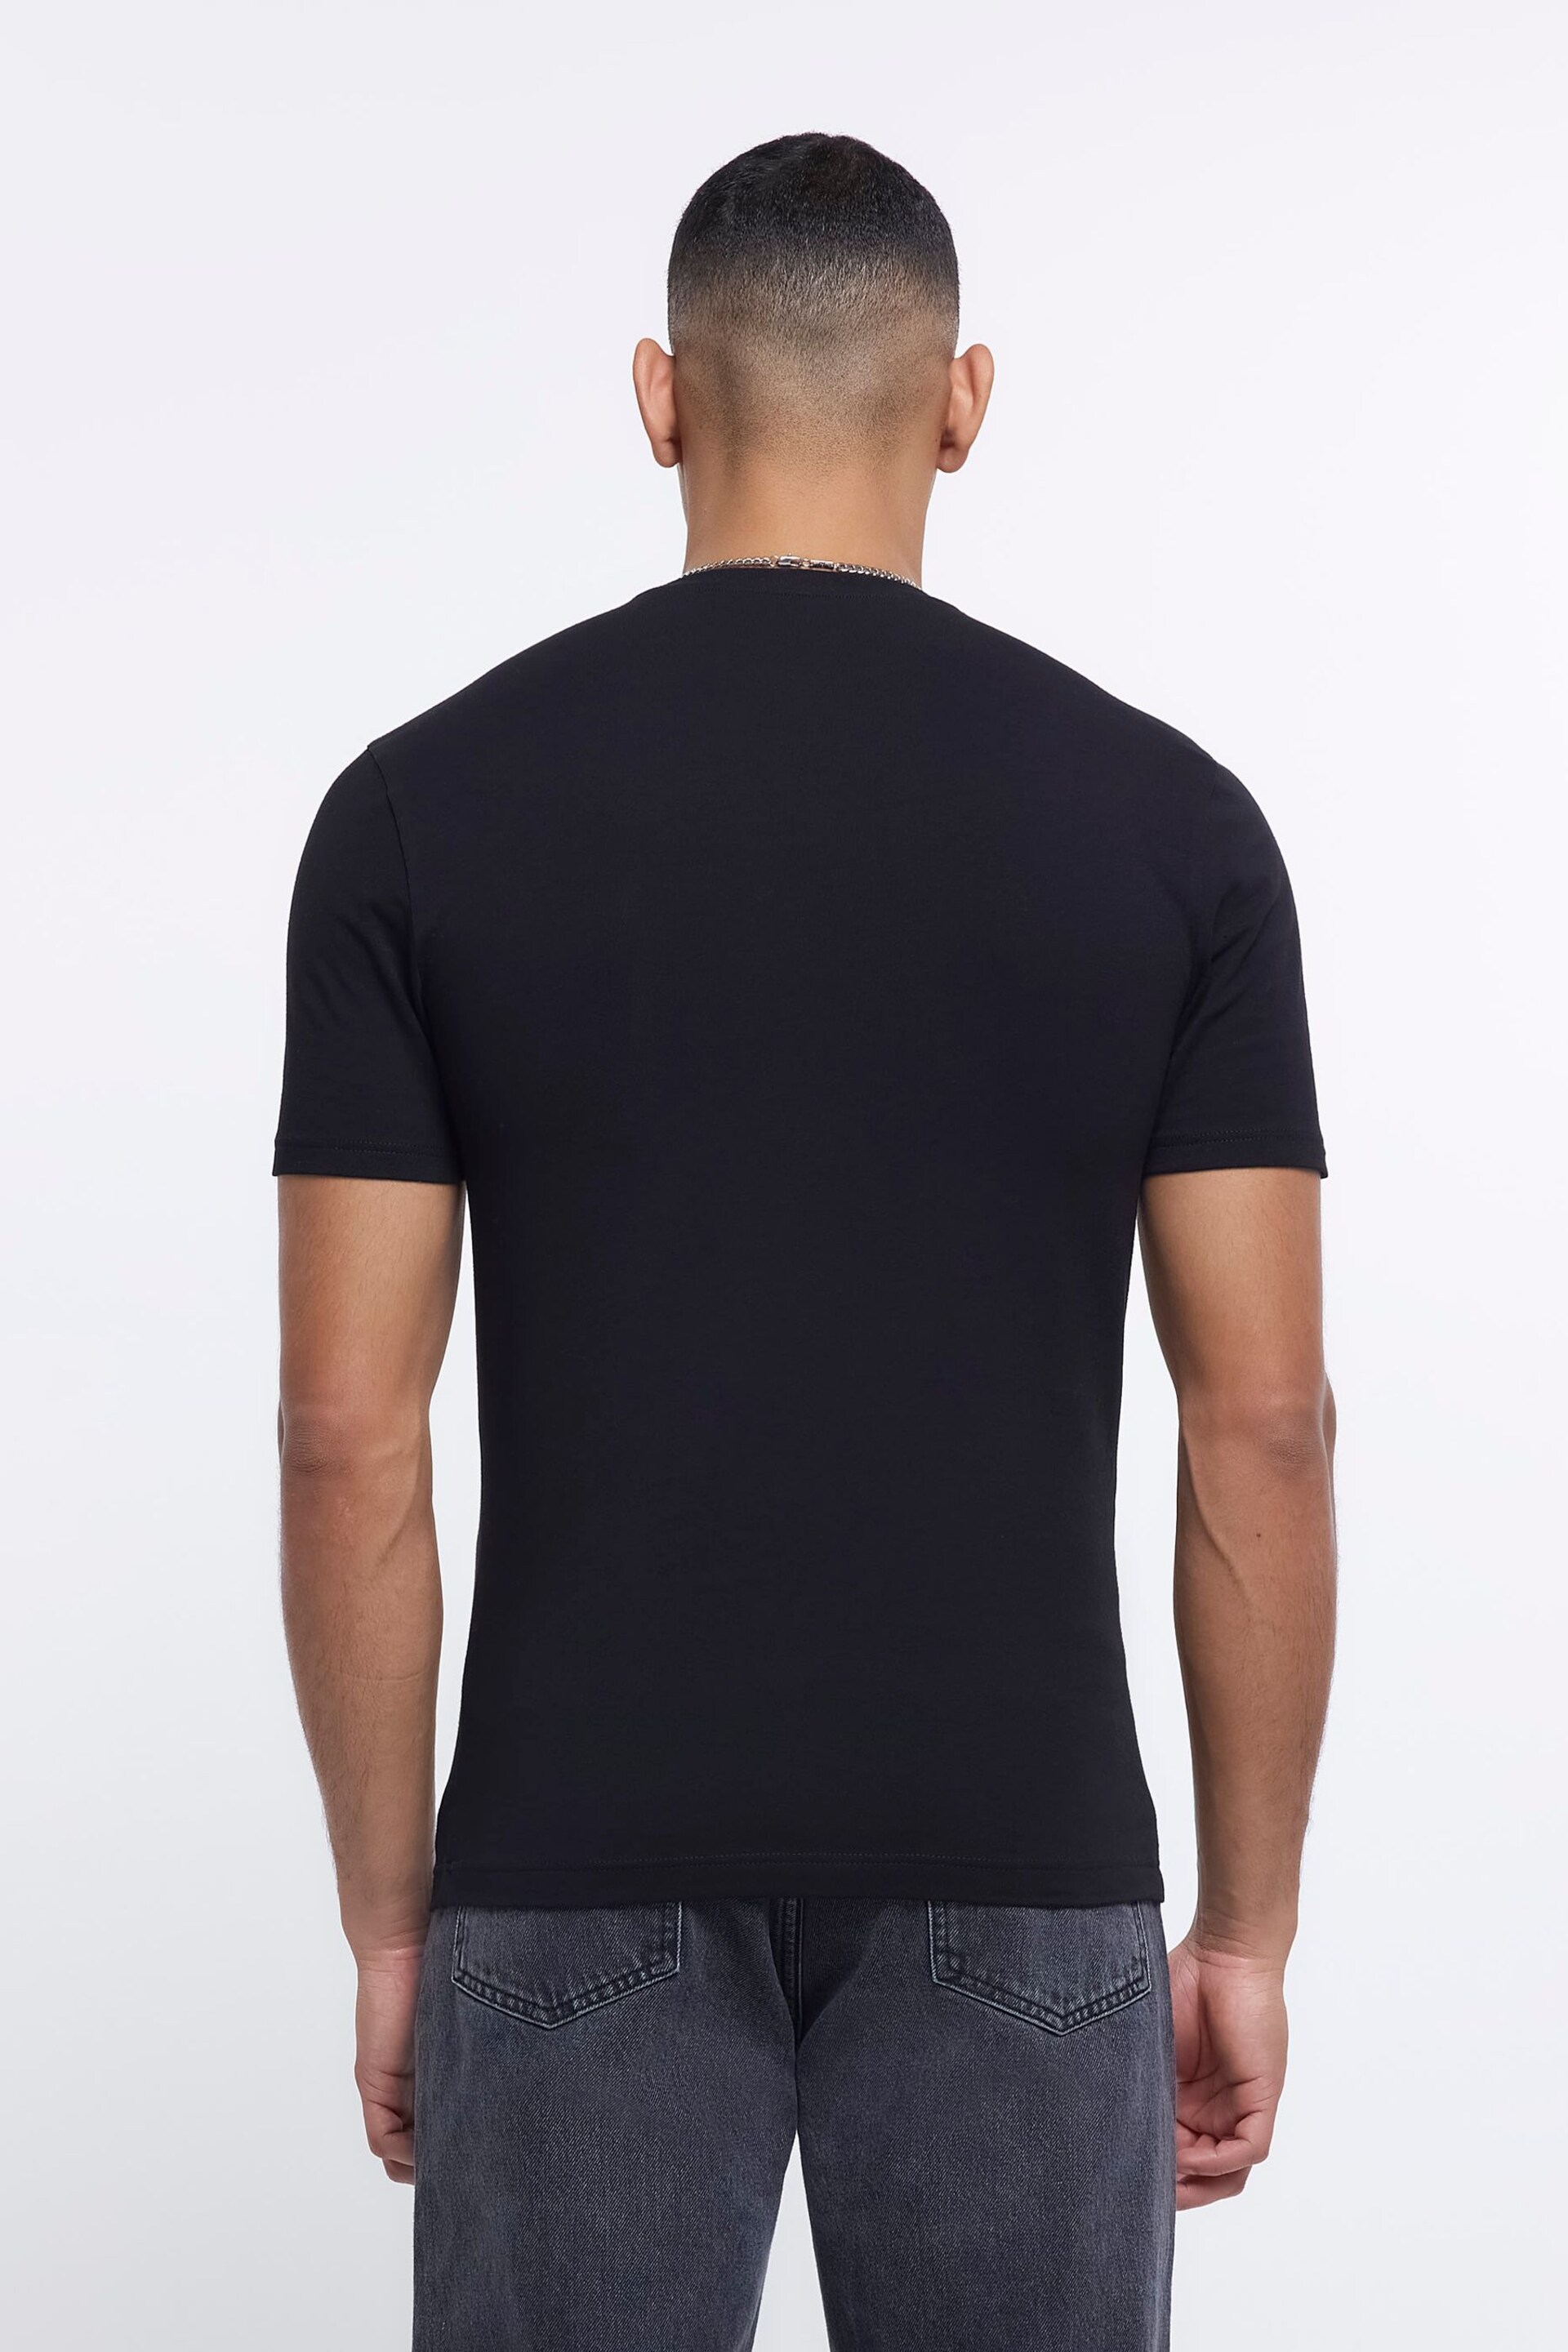 River Island Black Muscle Fit T-Shirt - Image 2 of 4